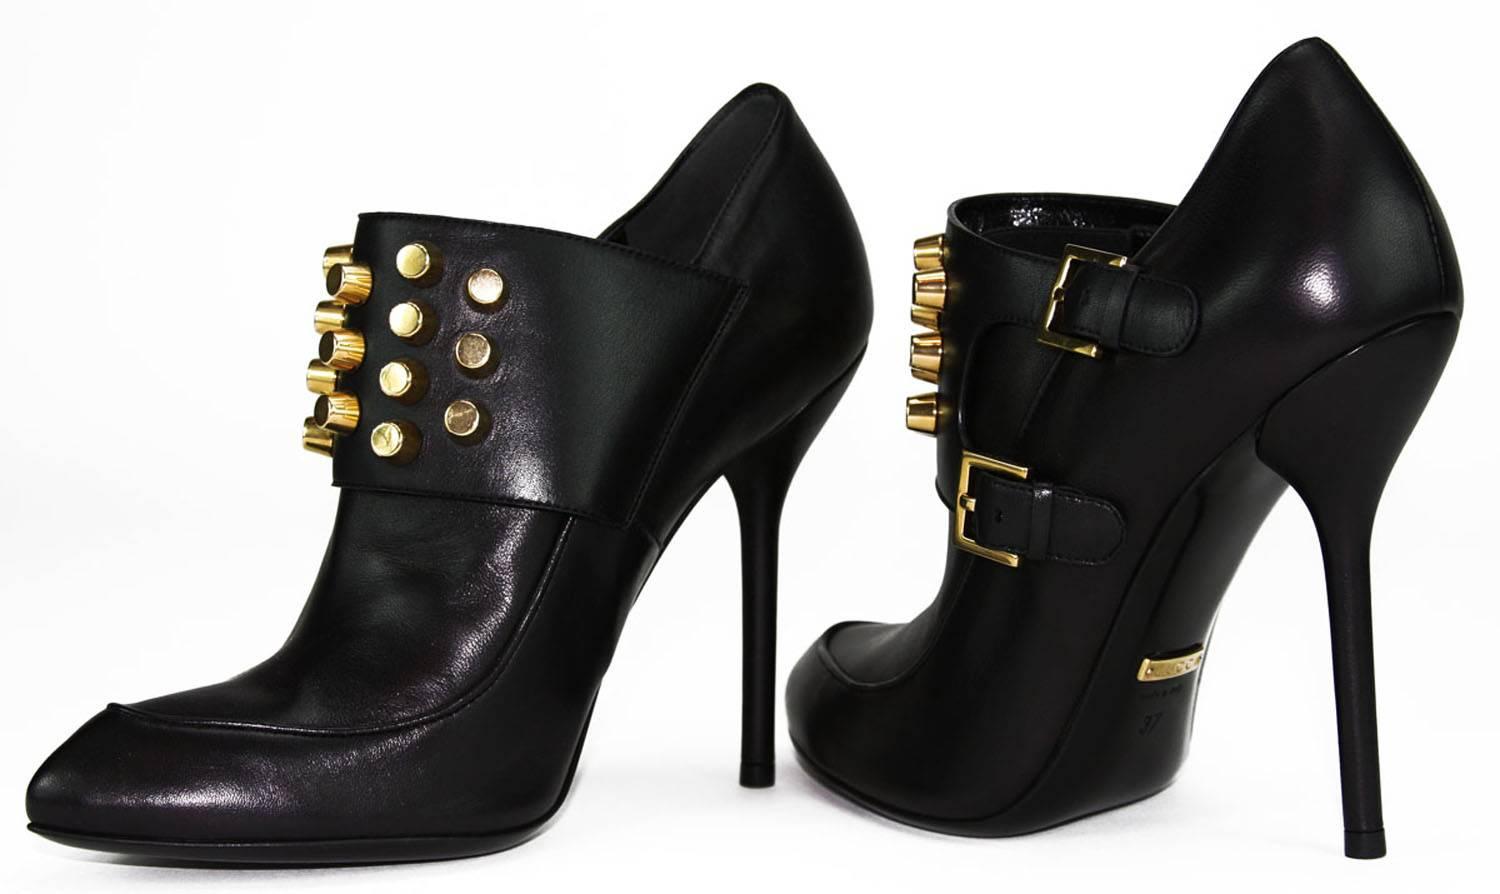 New GUCCI Studded Leather Ankle Boots
Italian Size 37 - US 7
100% Leather
Color – Classic Black
Cylinder Gold Tone Studs
Metal GUCCI Logo Under the Arch of the Shoe
Two Buckle Straps with Engraved GUCCI Logo
Elastic Insert on the Instep
Pointed Toe,